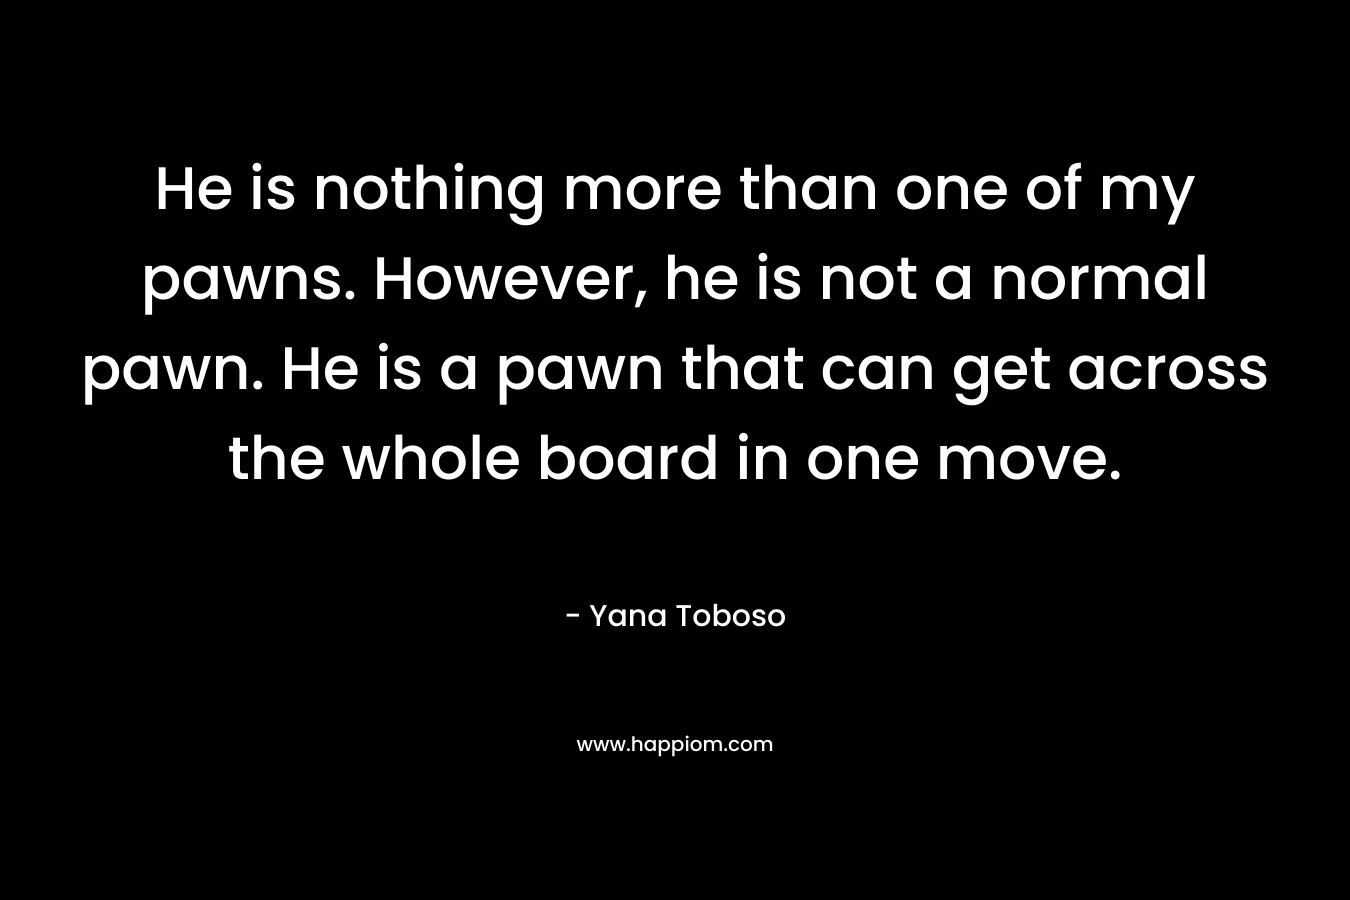 He is nothing more than one of my pawns. However, he is not a normal pawn. He is a pawn that can get across the whole board in one move. – Yana Toboso